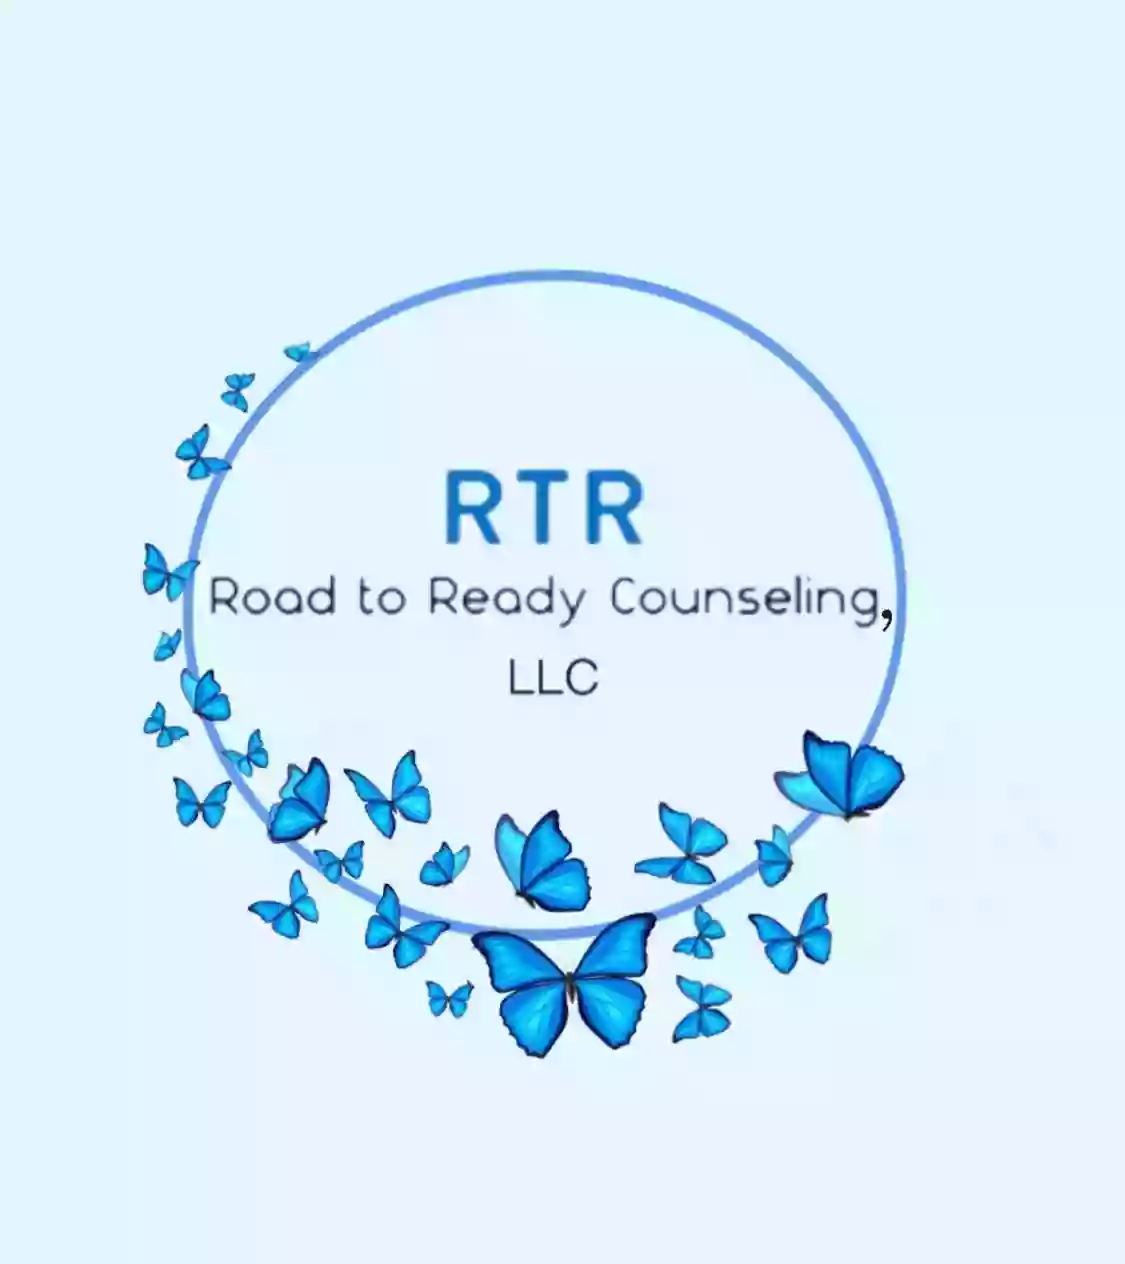 Road to Ready Counseling, LLC.